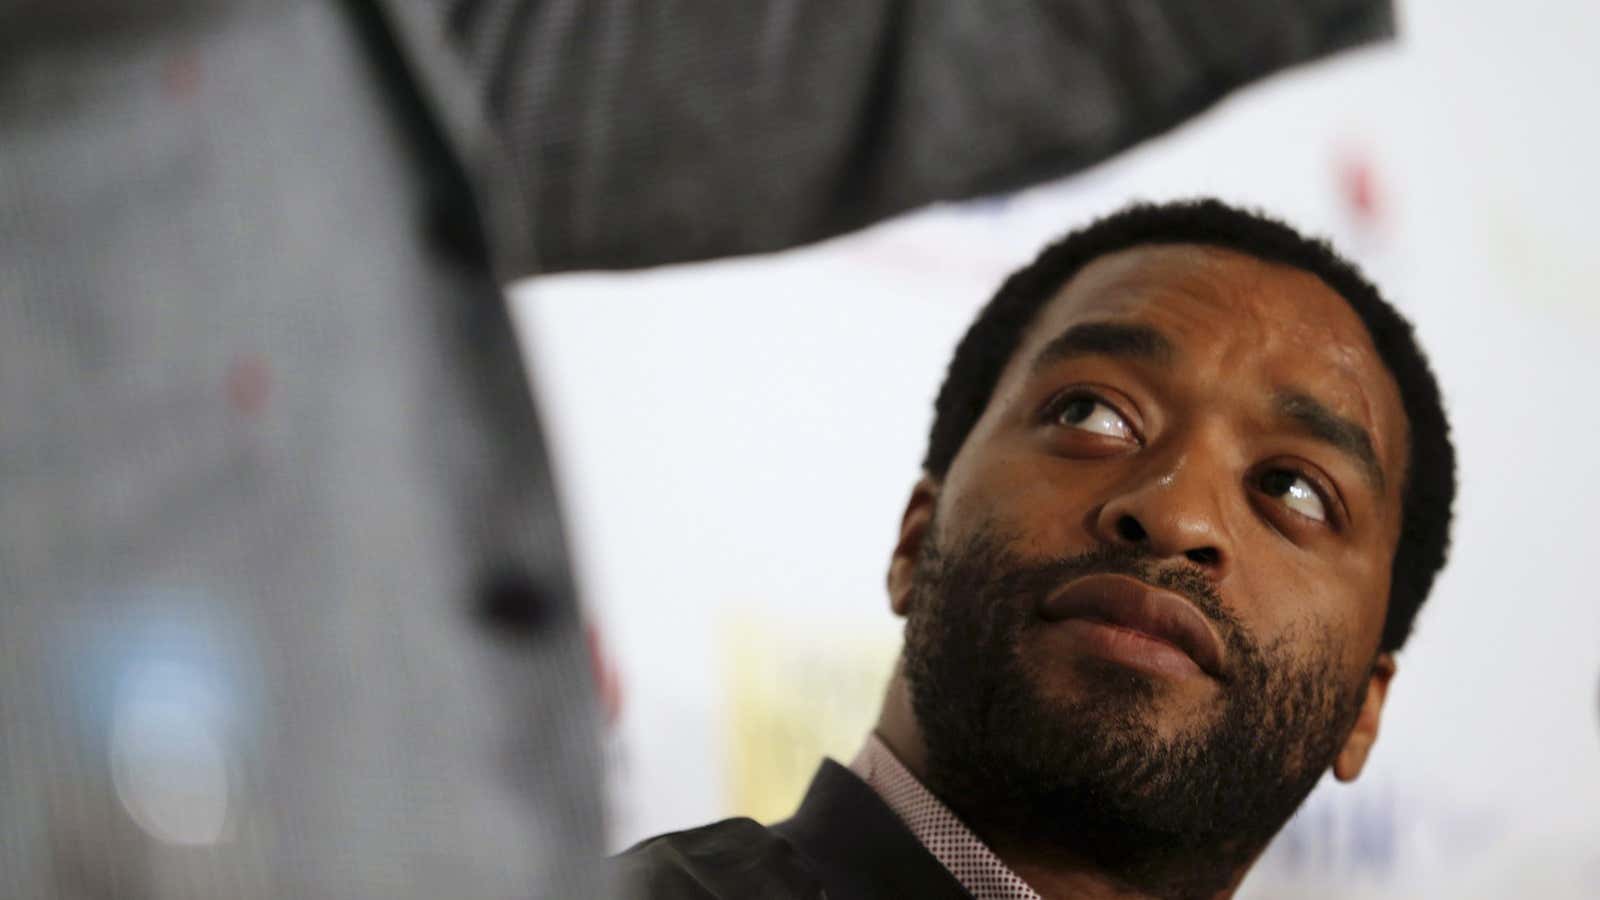 Nigerian British-born actor Chiwetel Ejiofor listens to a speaker during a news conference at the premiere for the film “Half of a Yellow Sun”, an adaptation of novelist Chimamanda Ngozi Adichie’s book, in Lagos, Nigeria in 2014.